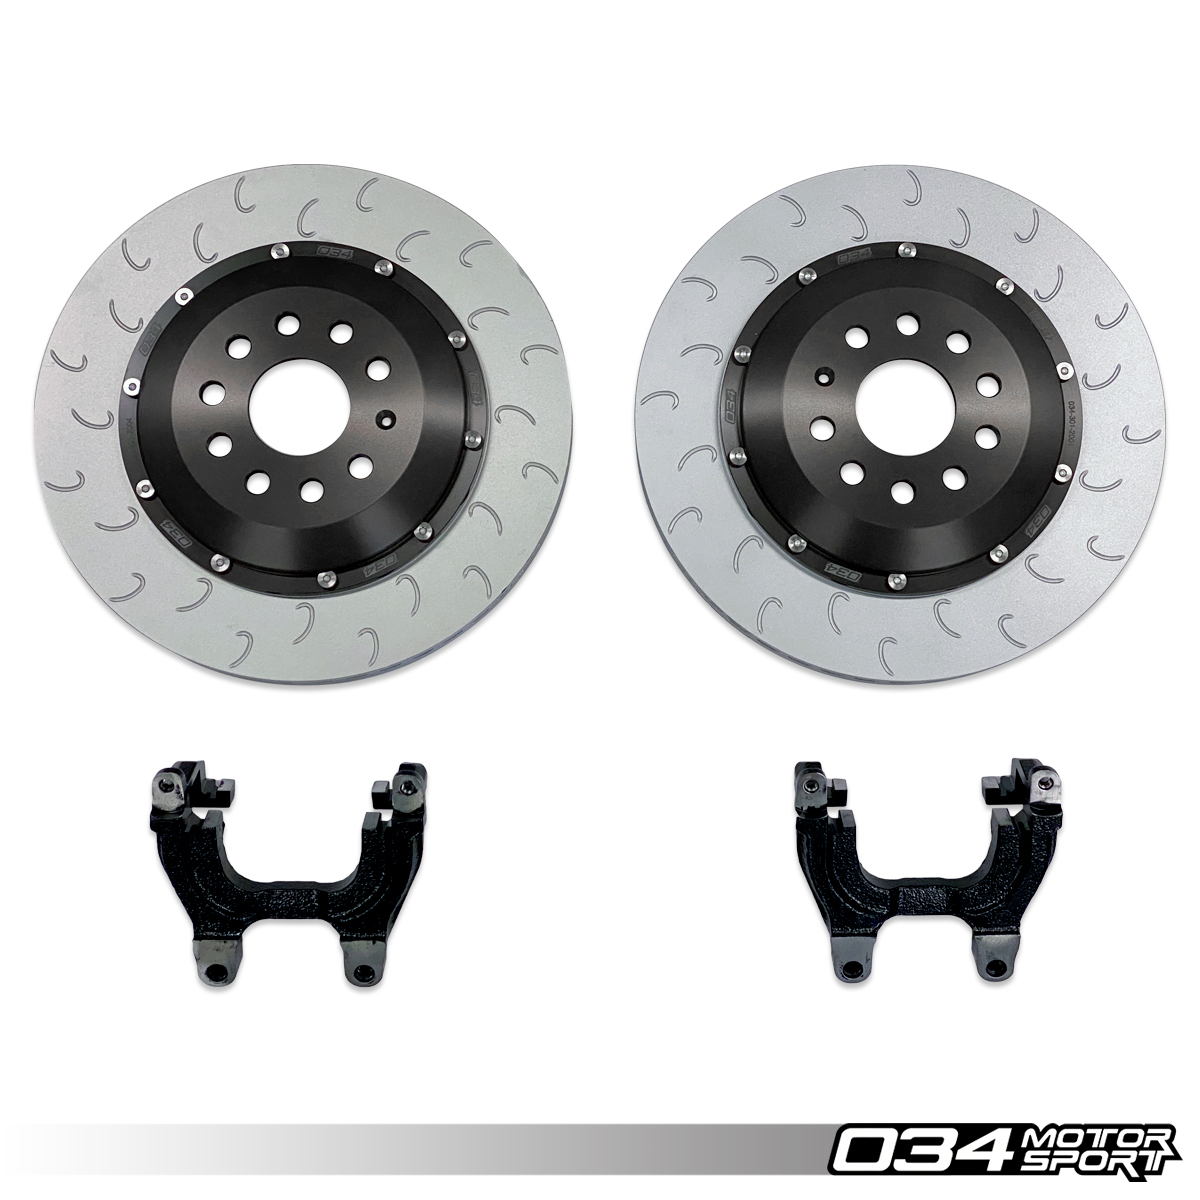 FOR AUDI S6 S7 S8 REAR CROSS DRILLED PERFORMANCE BRAKE DISCS PAIR 356mm COATED